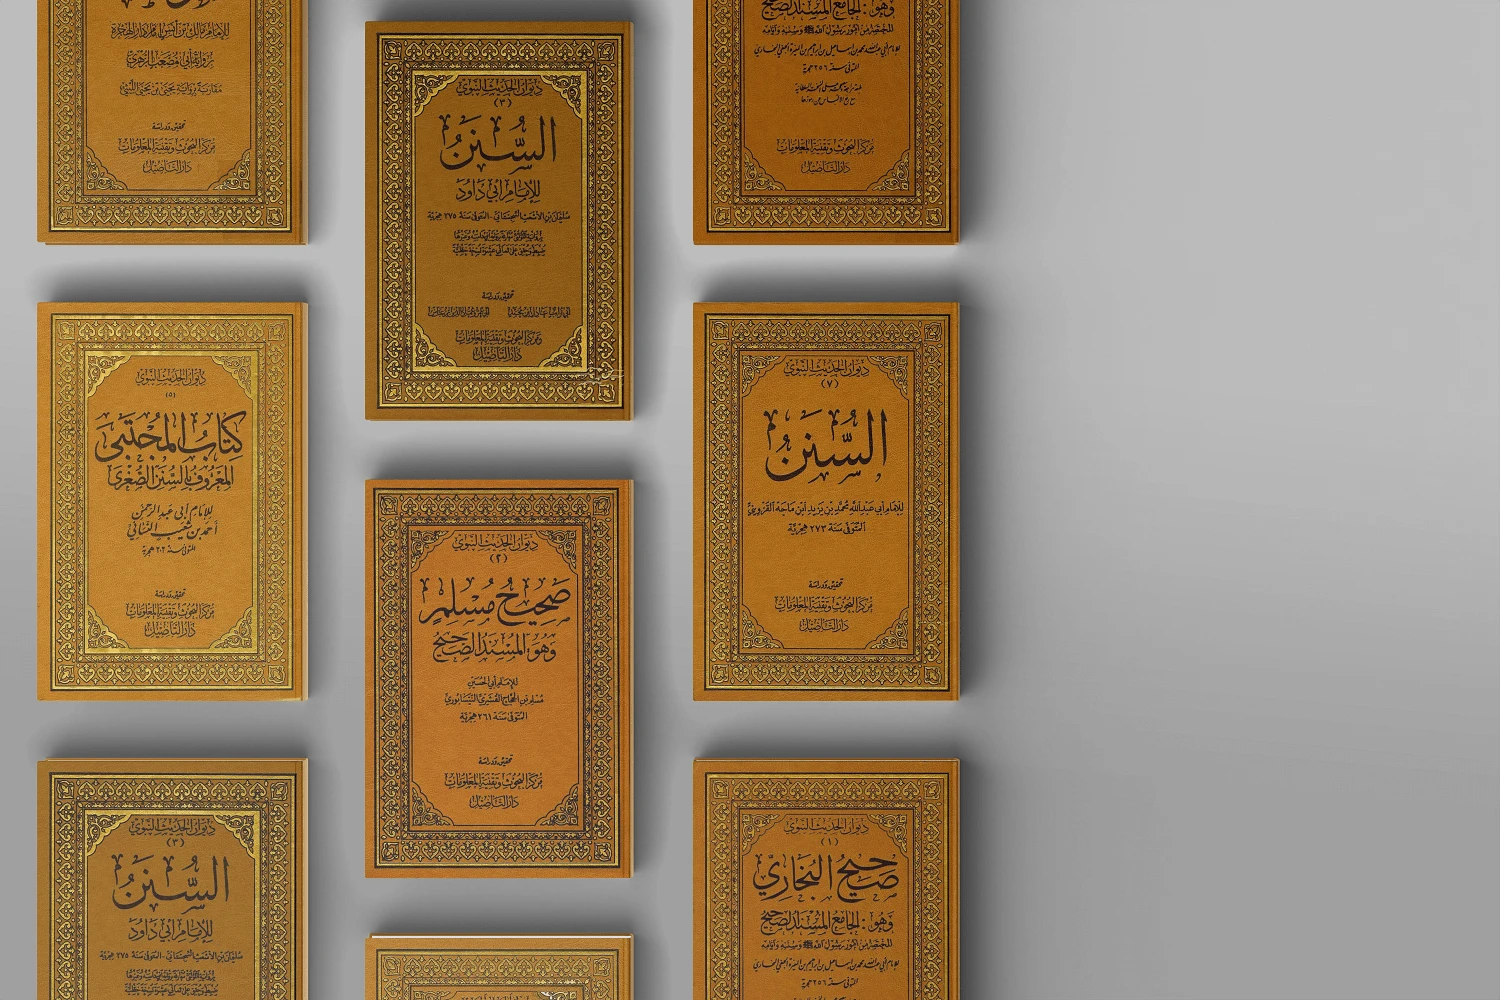 1605-academy-of-hadith-book-transmitters12-16974372750511-min-17107123262512.png